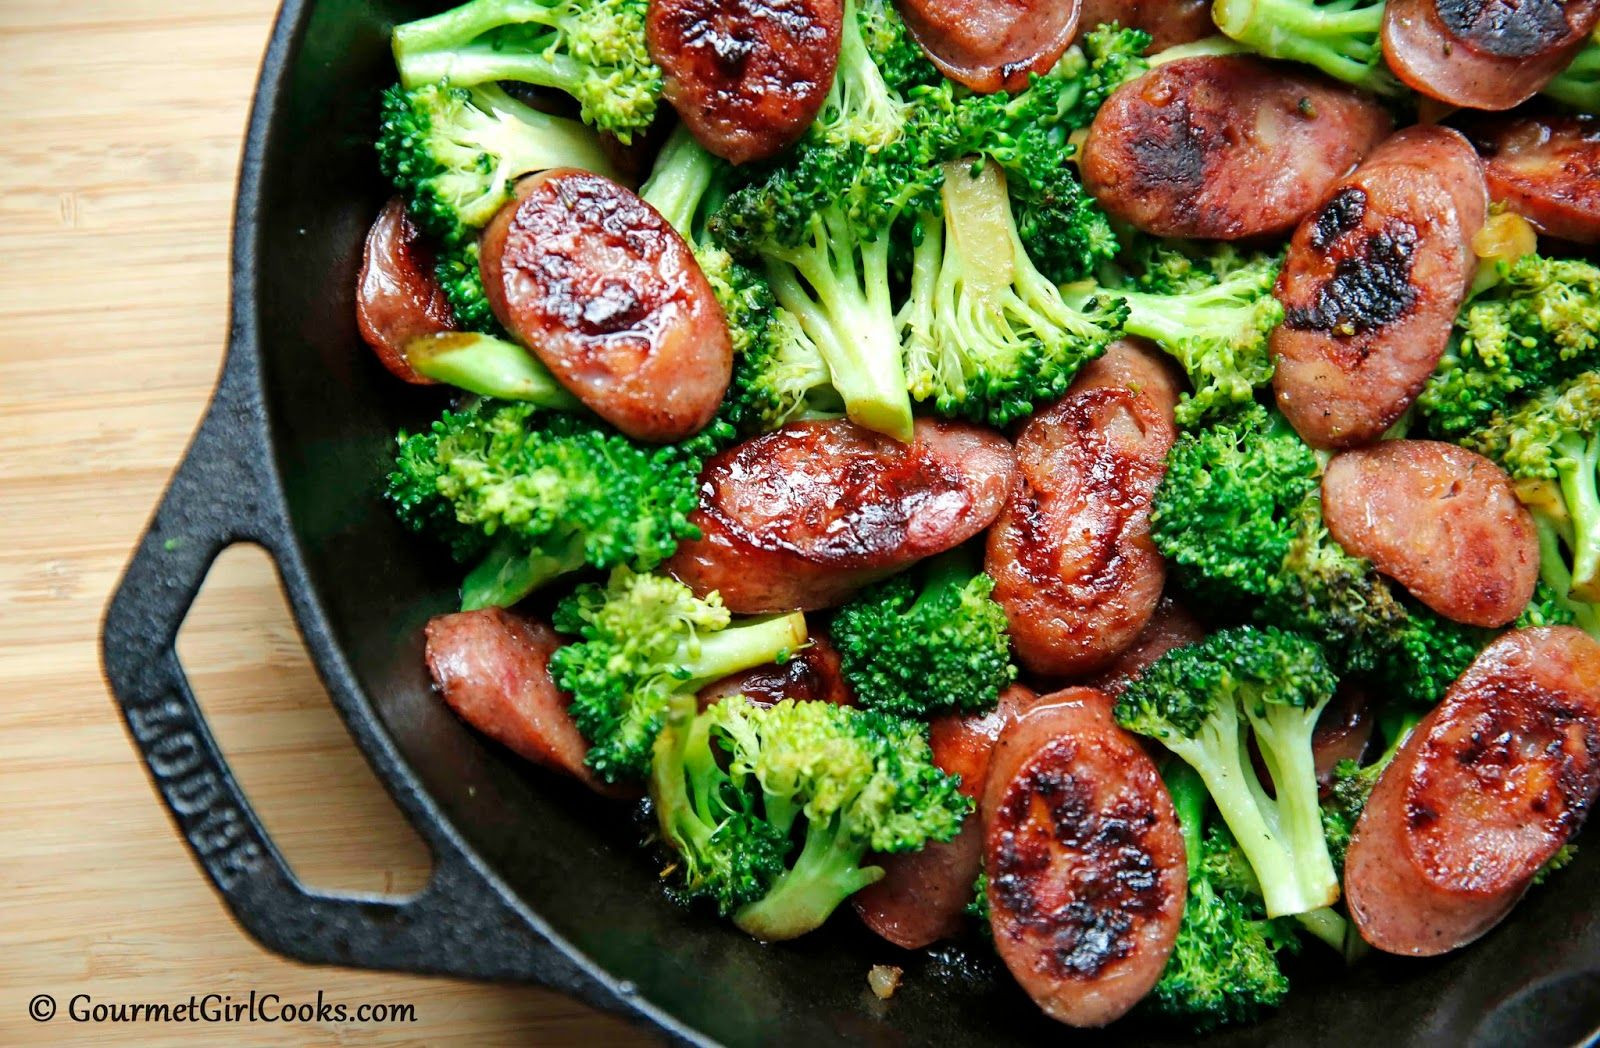 Gourmet Low Carb Recipes
 Gourmet Girl Cooks Sausage & Broccoli Quick Easy Low